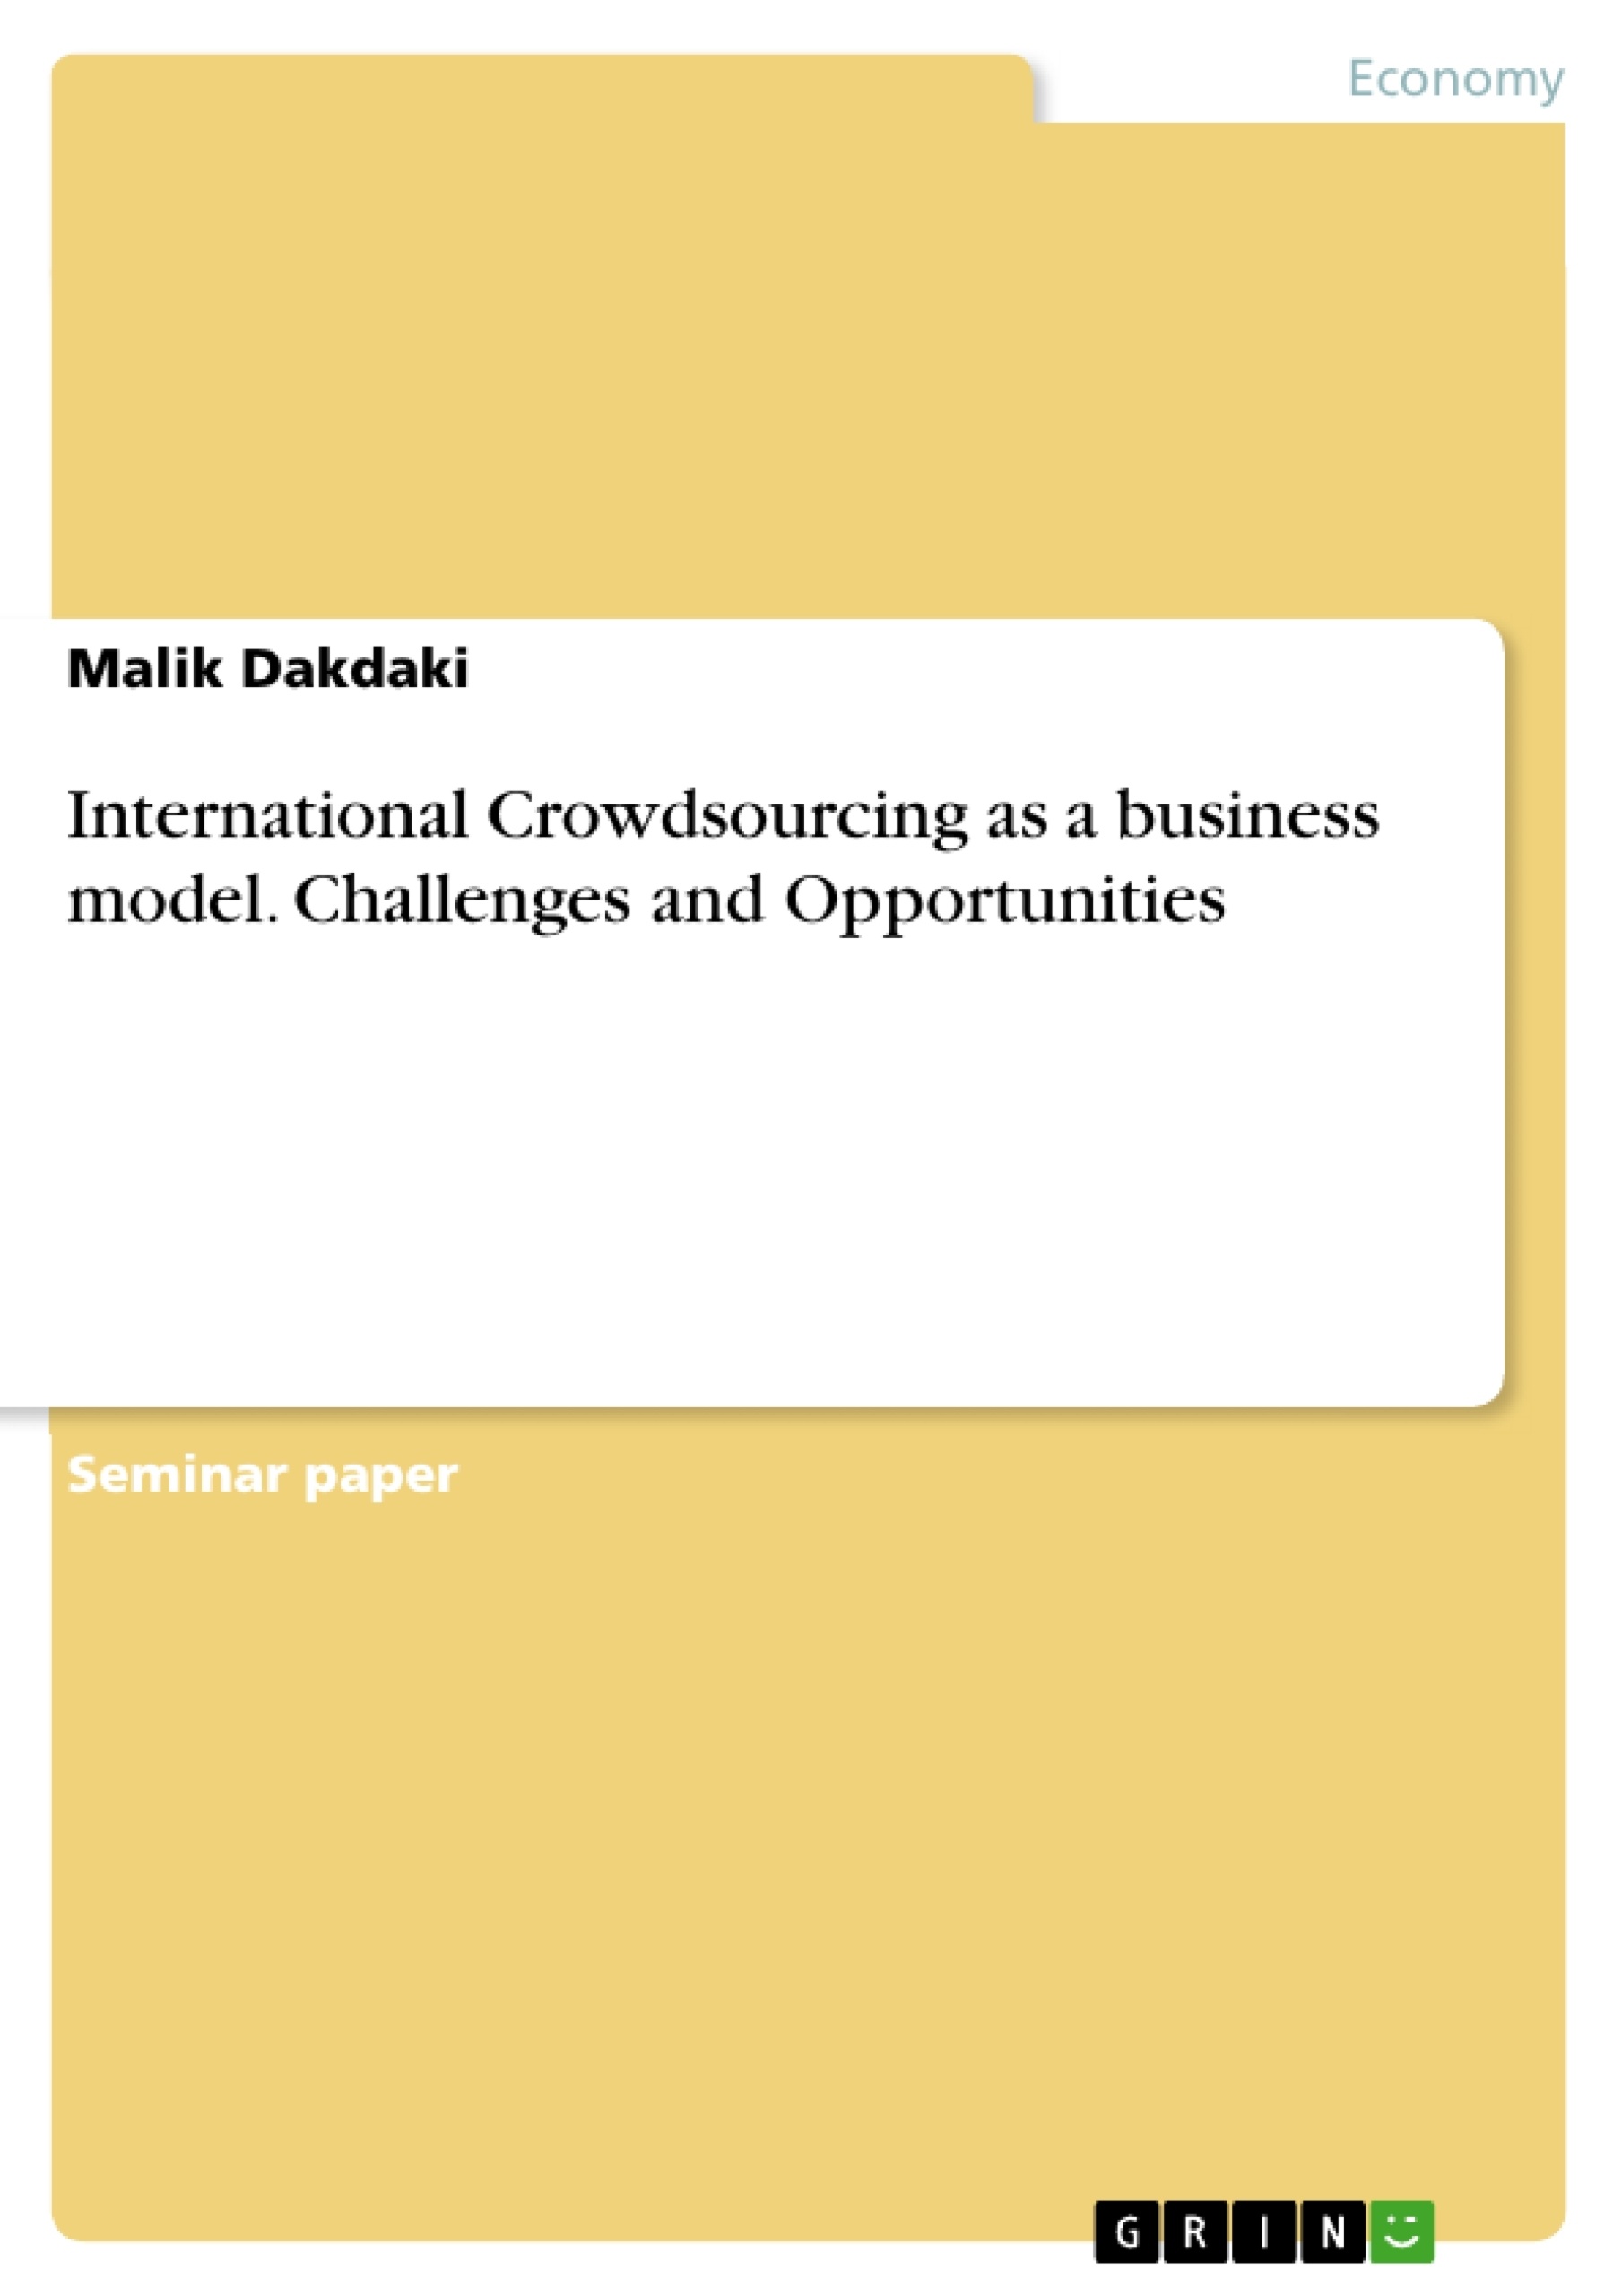 Title: International Crowdsourcing as a business model. Challenges and Opportunities